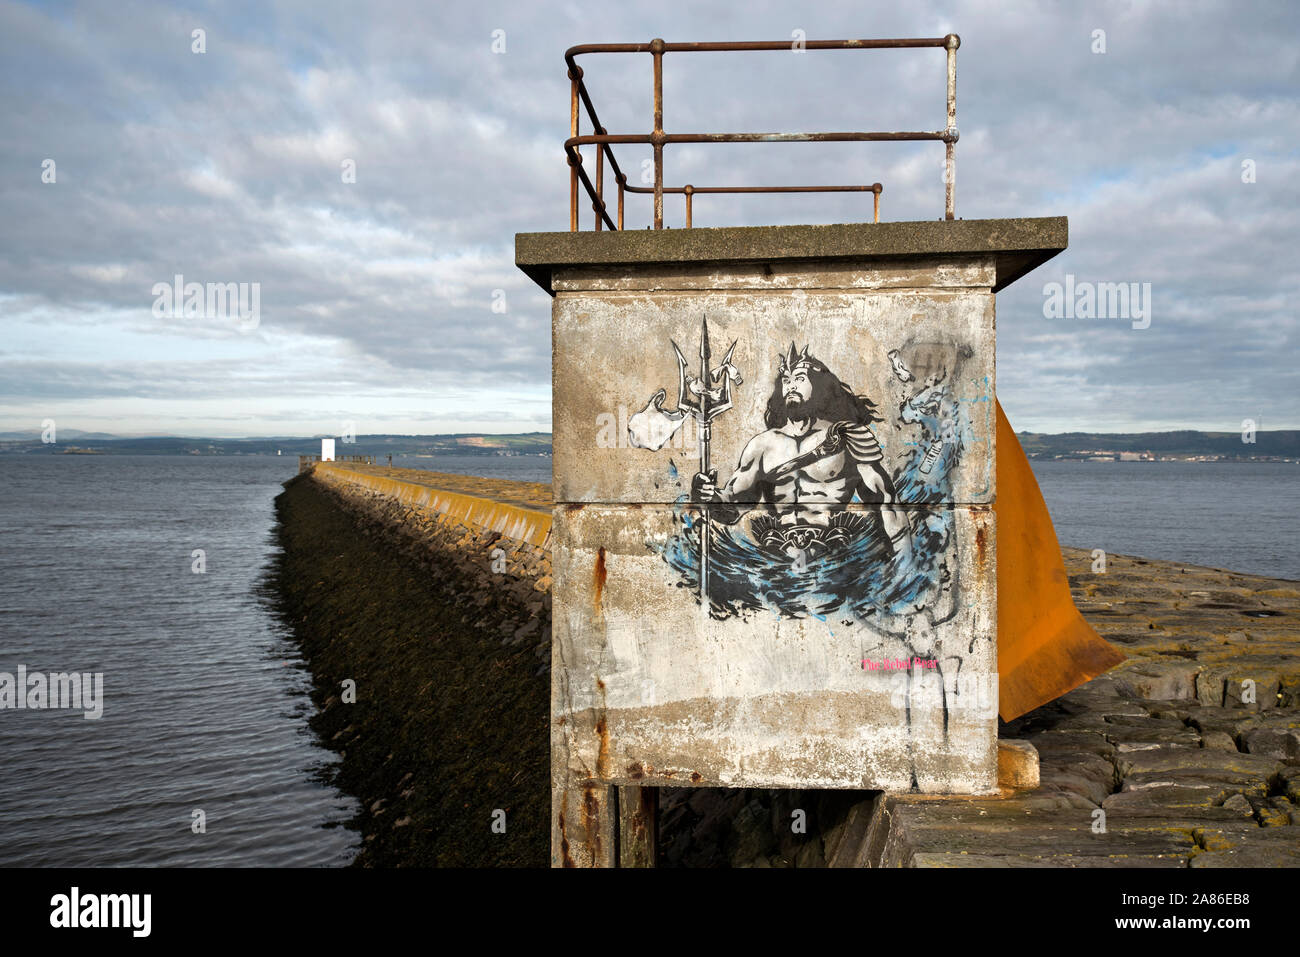 Stencil graffiti showing Neptune with plastic bags caught on his trident, on the breakwater at Granton Harbour, Edinburgh, Scotland, UK. Stock Photo